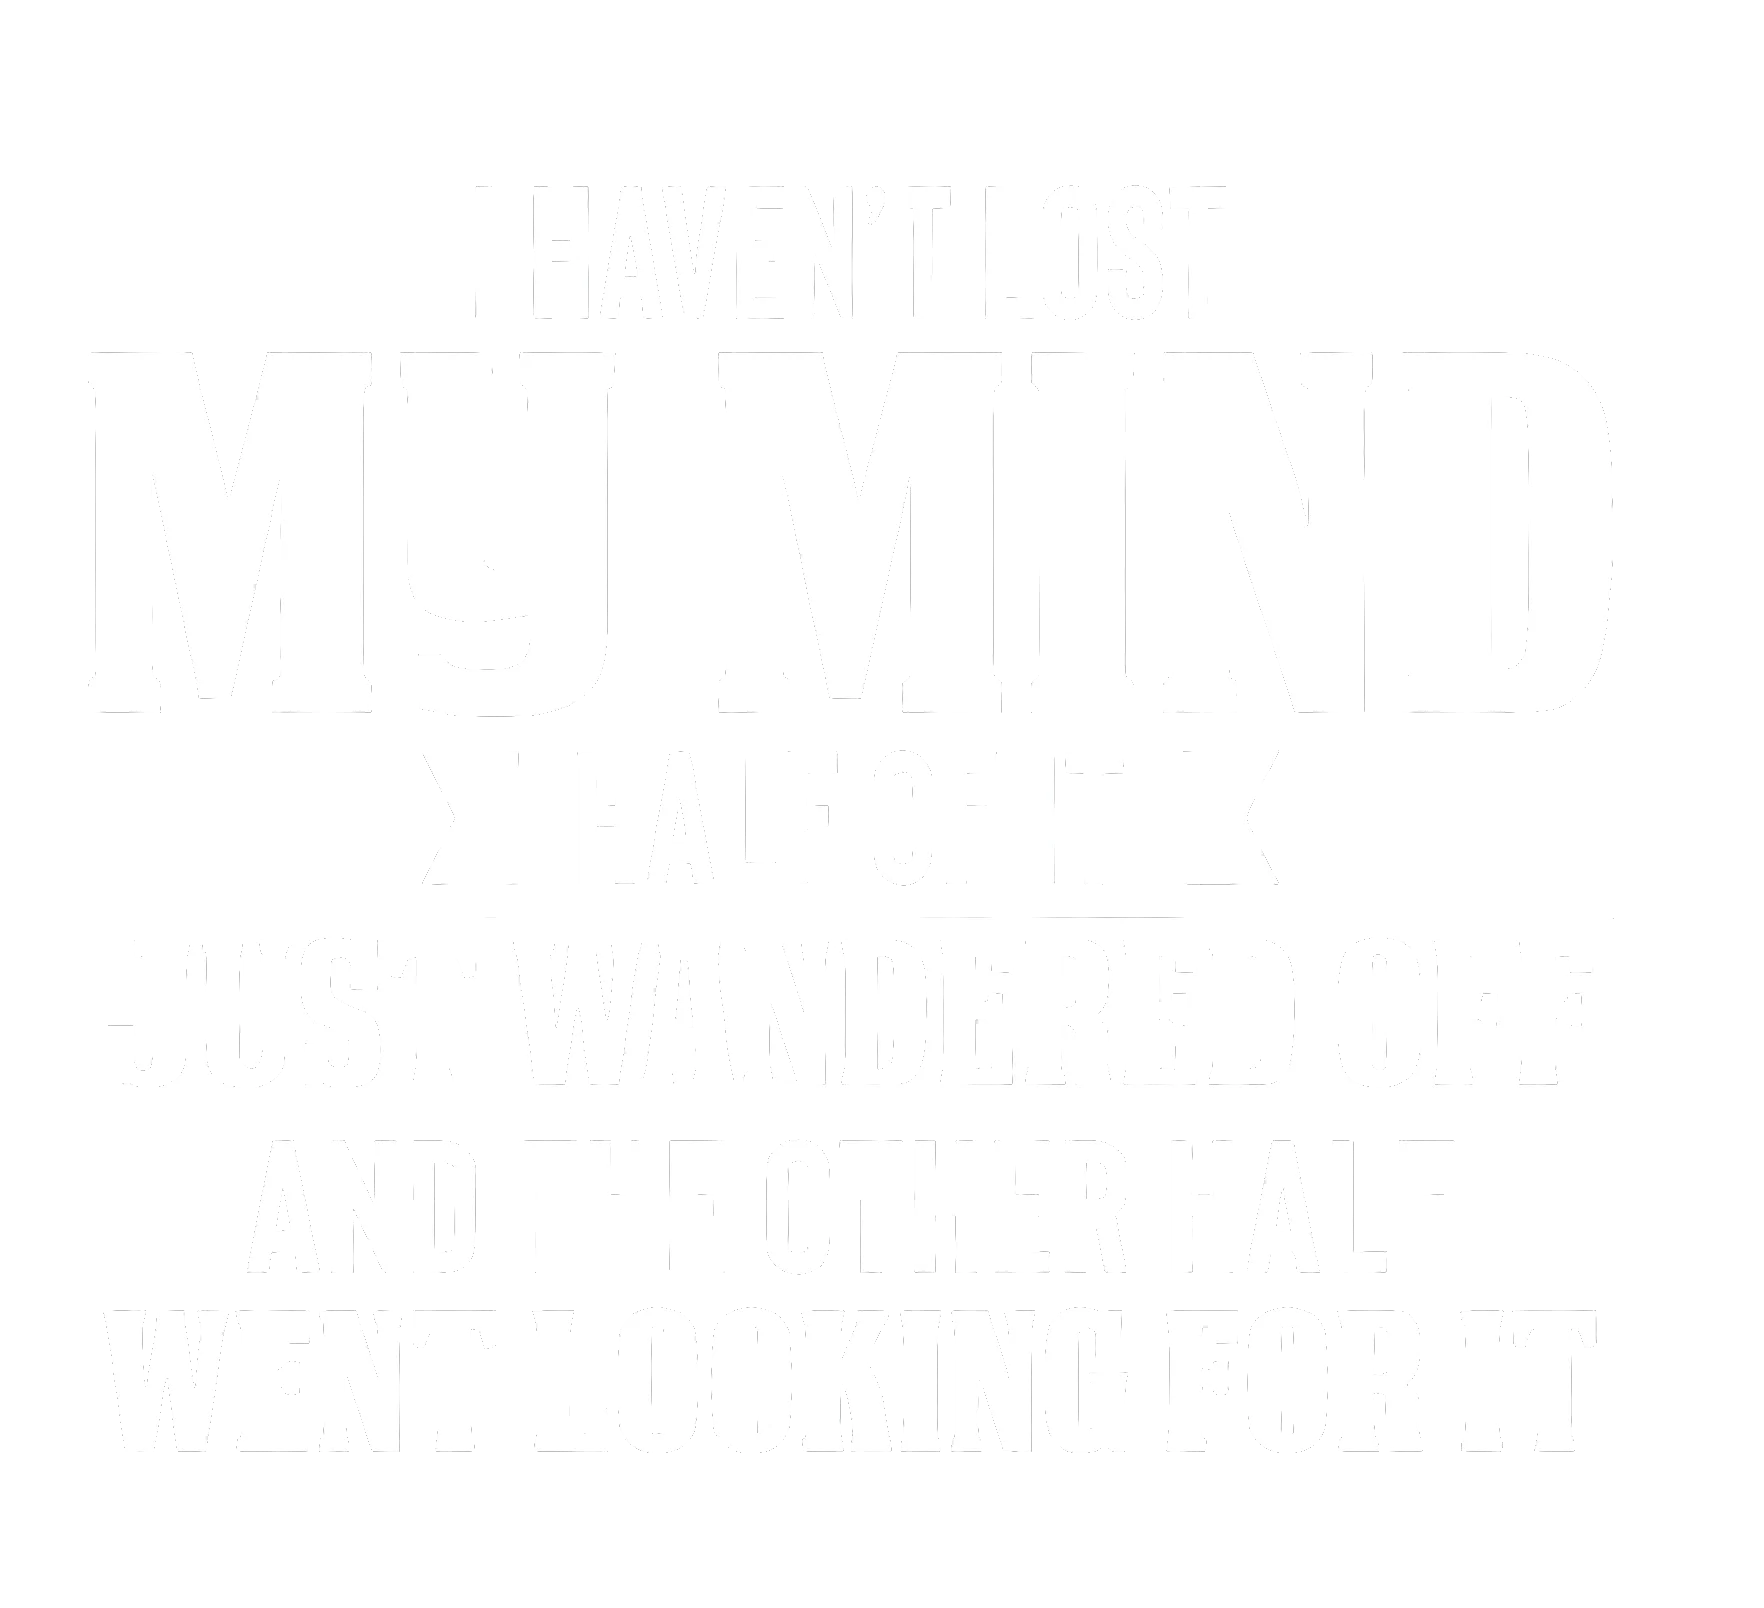 Men's i haven‘t lost my mind half of it just wandered off and the other half went looking for it Funny Graphic Print Casual Text Letters Cotton T-Shirt